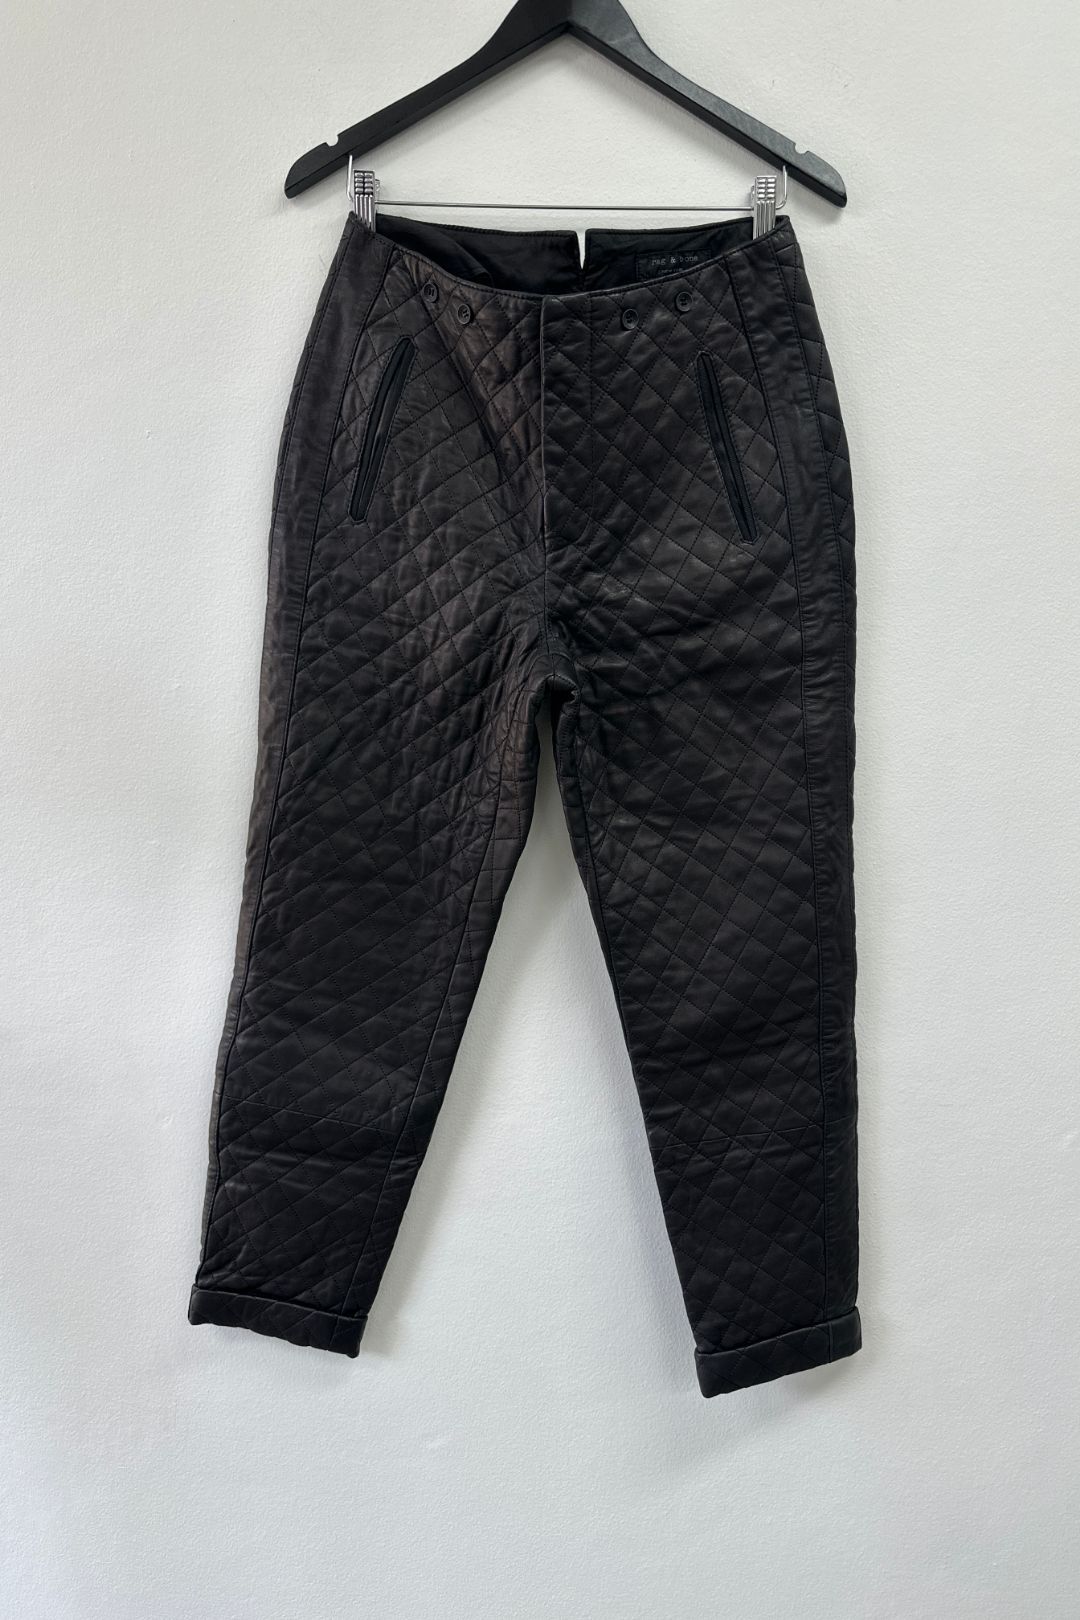 Rag & Bone - Quilted Leather Woodstock Pant